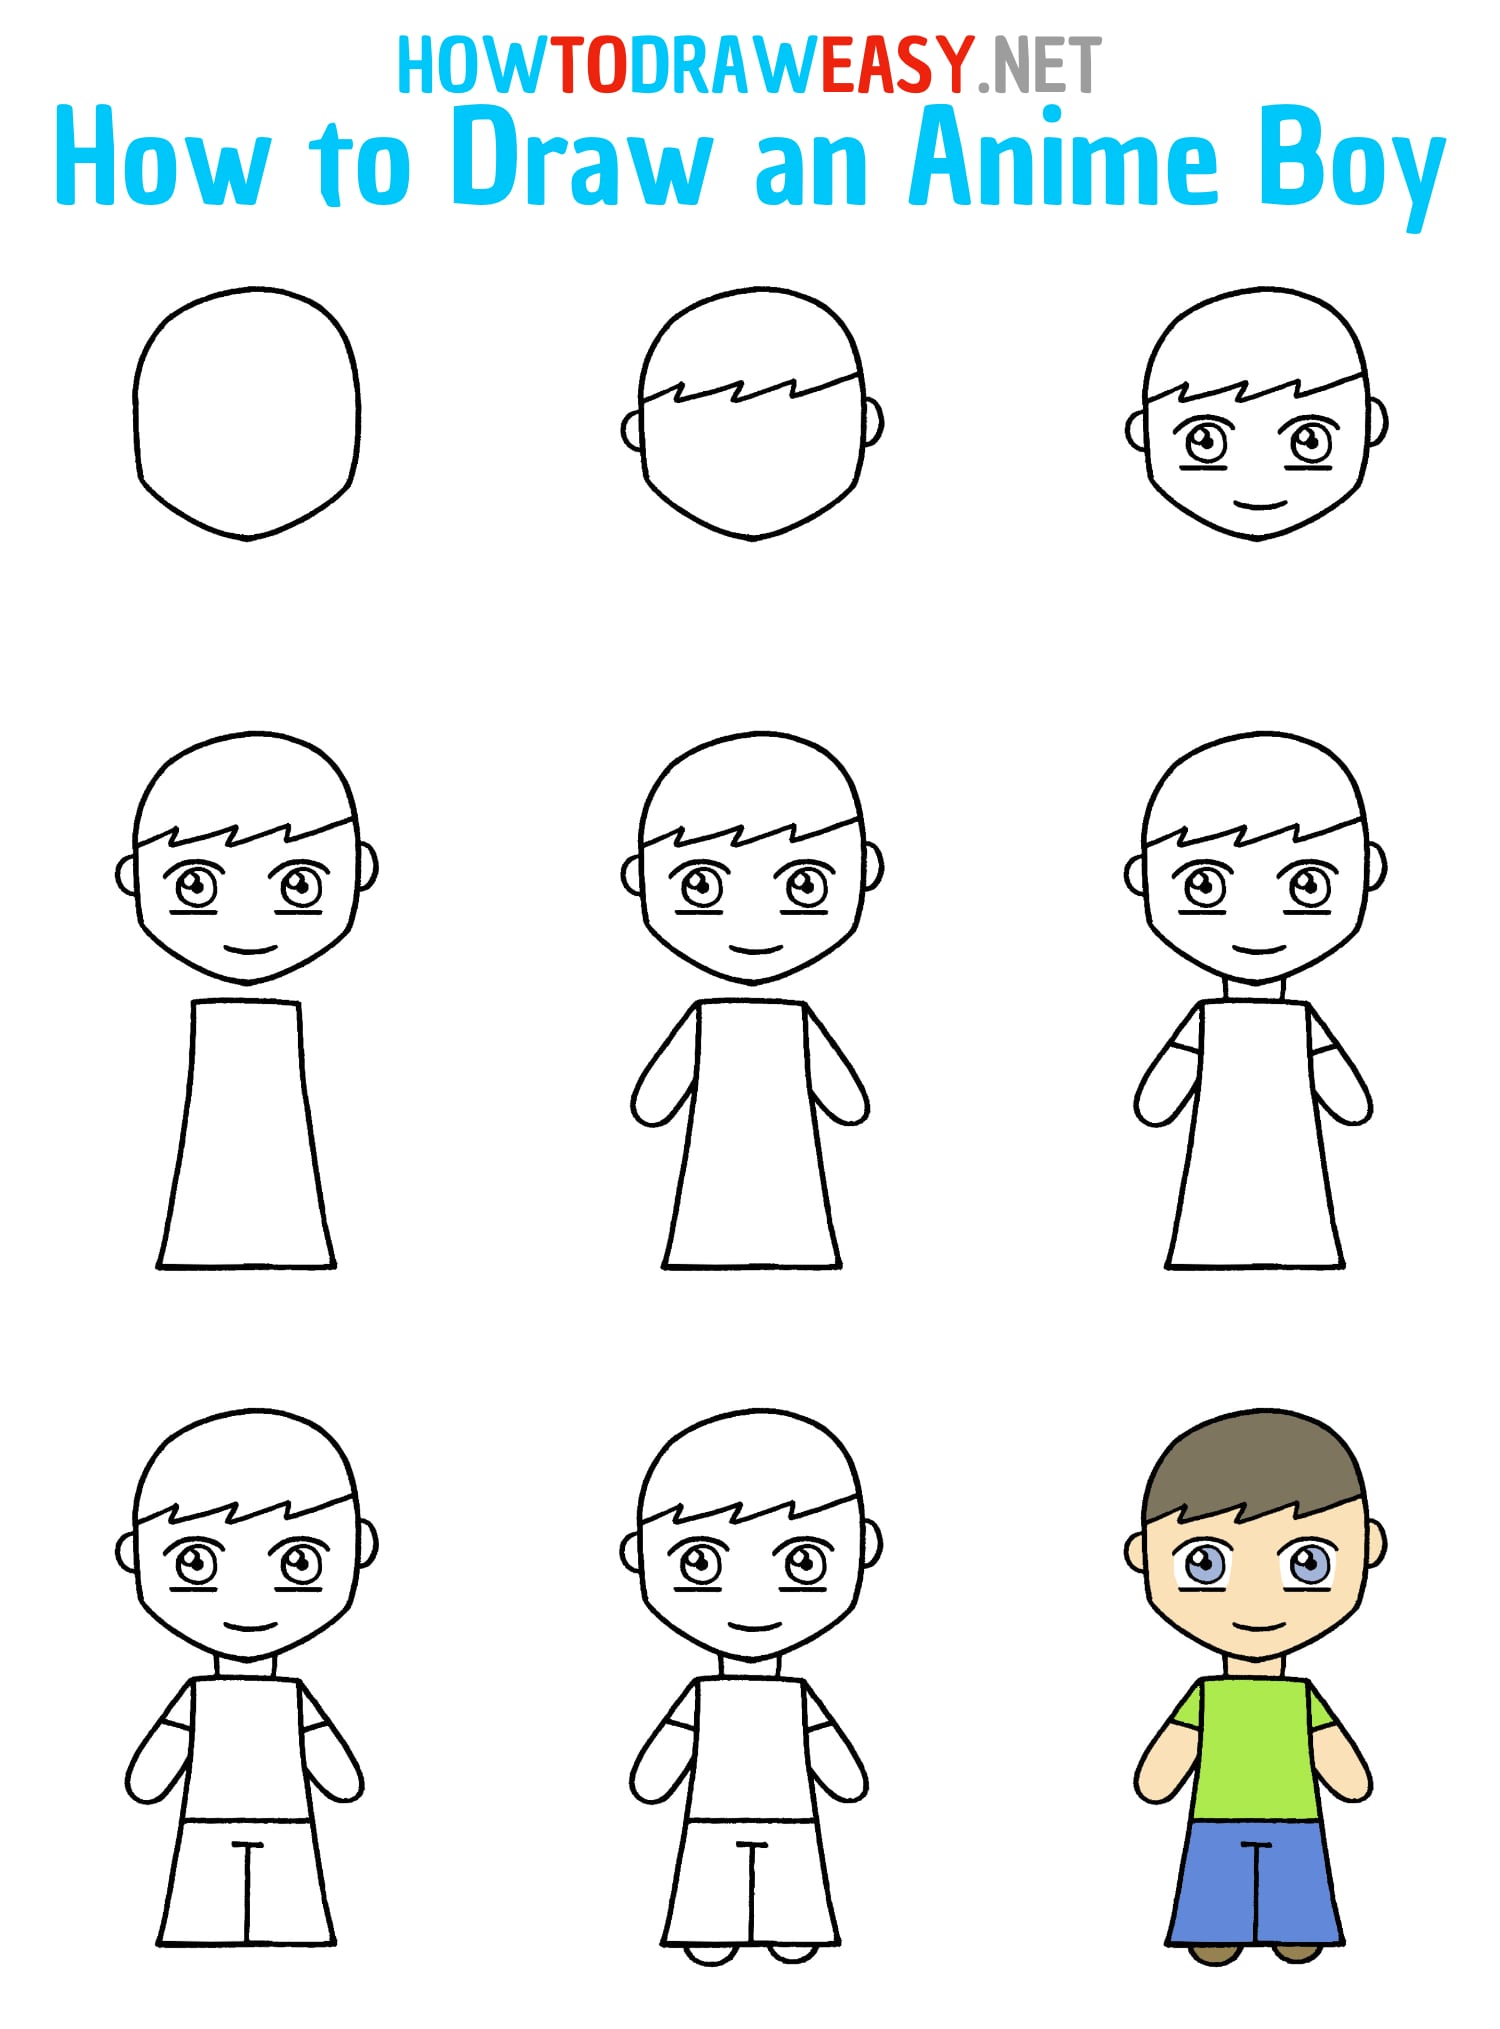 How to Draw an Anime Boy Step by Step